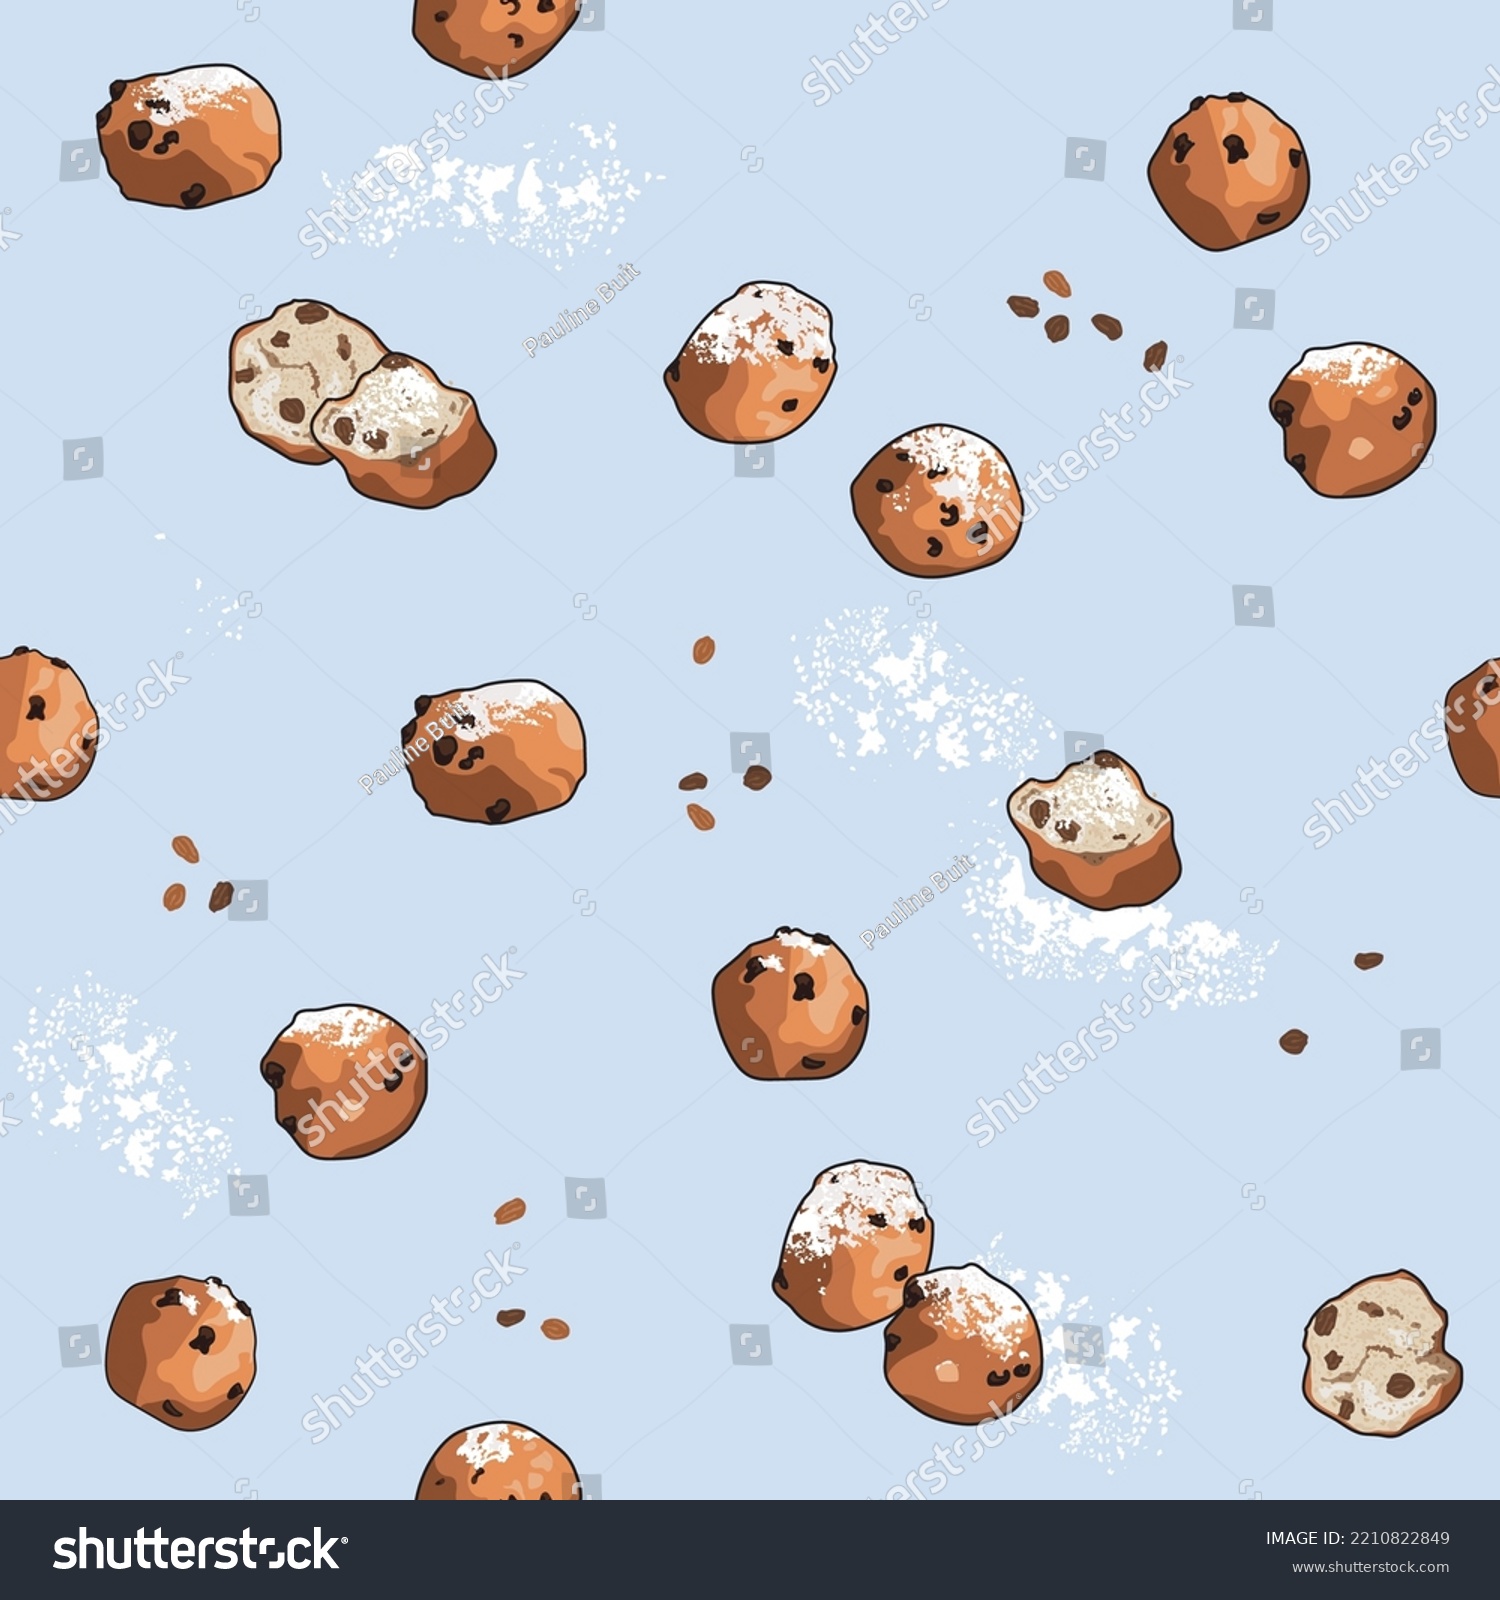 Seamless pattern with Dutch traditional 'oliebollen', deep fried doughnut balls with raisins and powdered sugar, typical Dutch food for new-year #2210822849